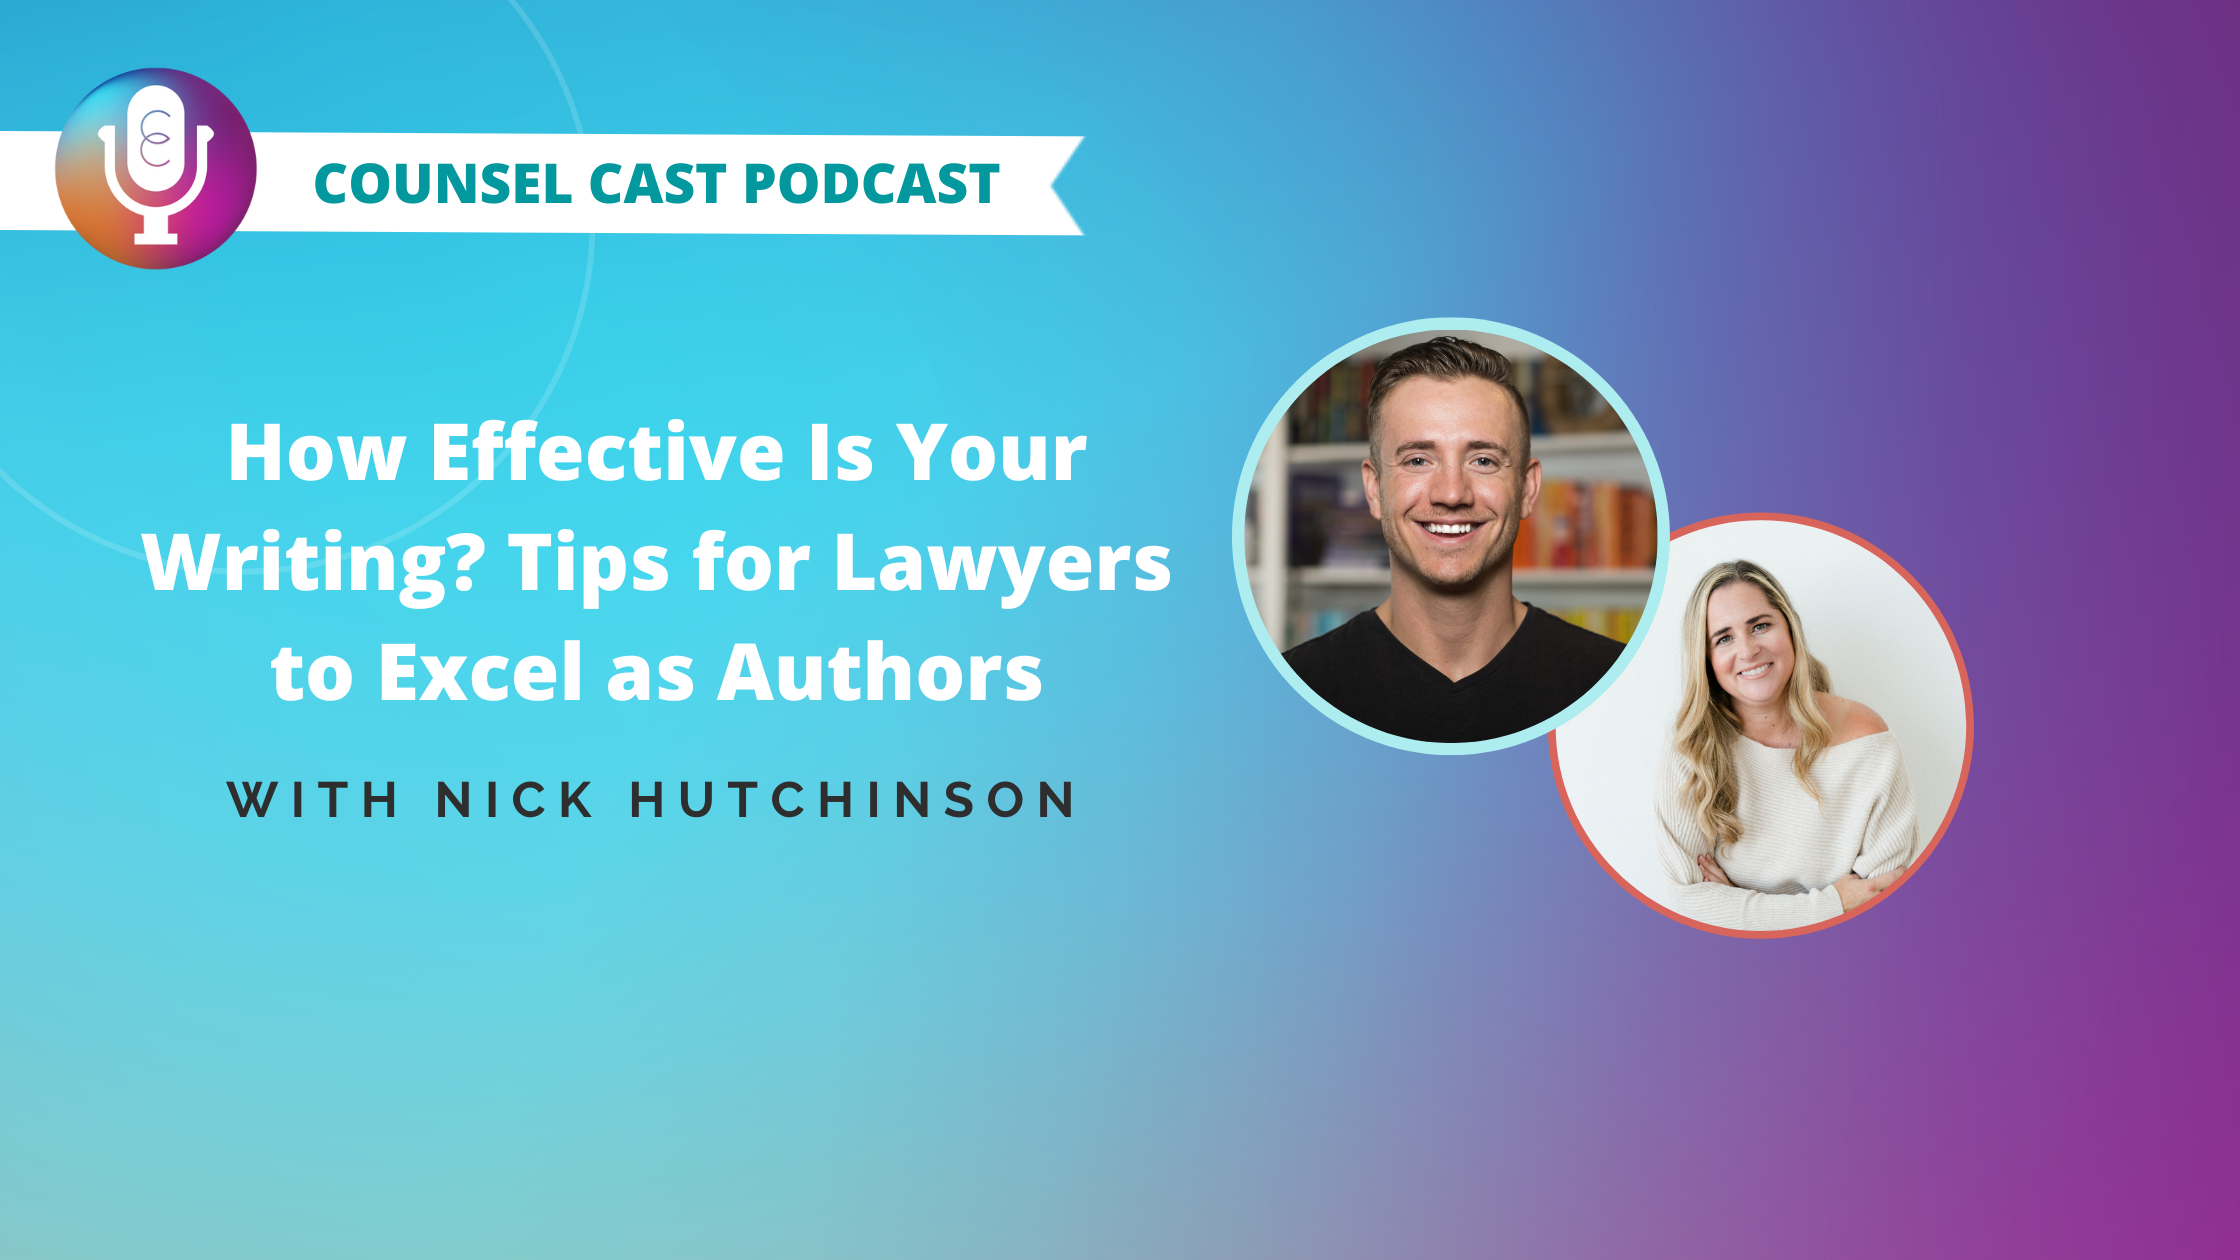 How Effective Is Your Writing? Tips for Lawyers to Excel as Authors with Nick Hutchinson